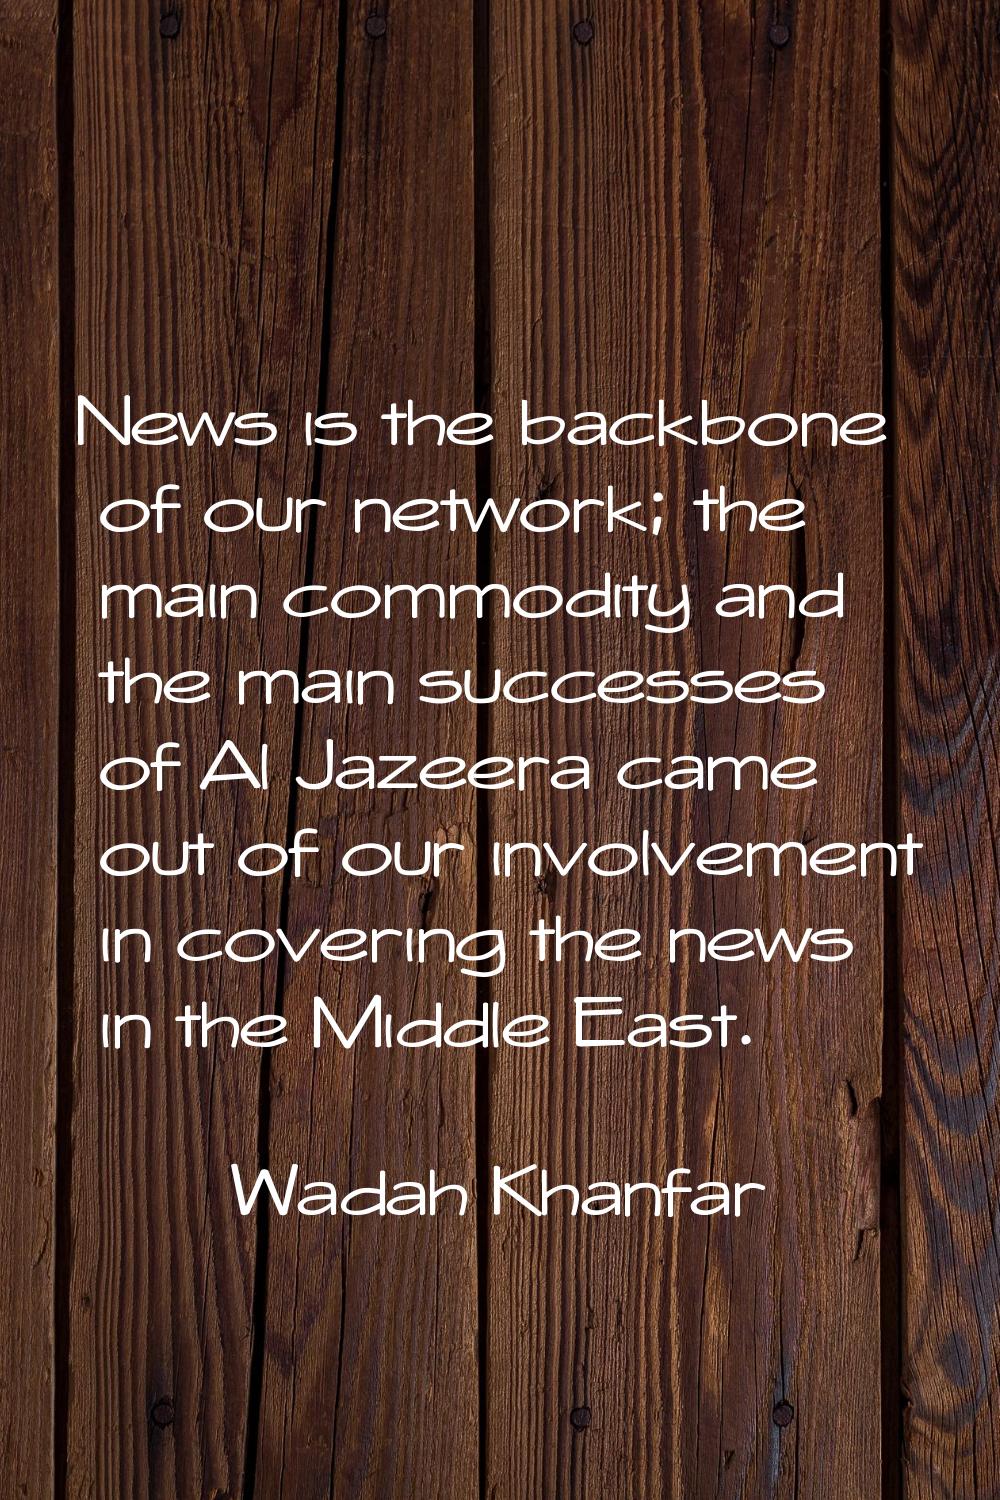 News is the backbone of our network; the main commodity and the main successes of Al Jazeera came o